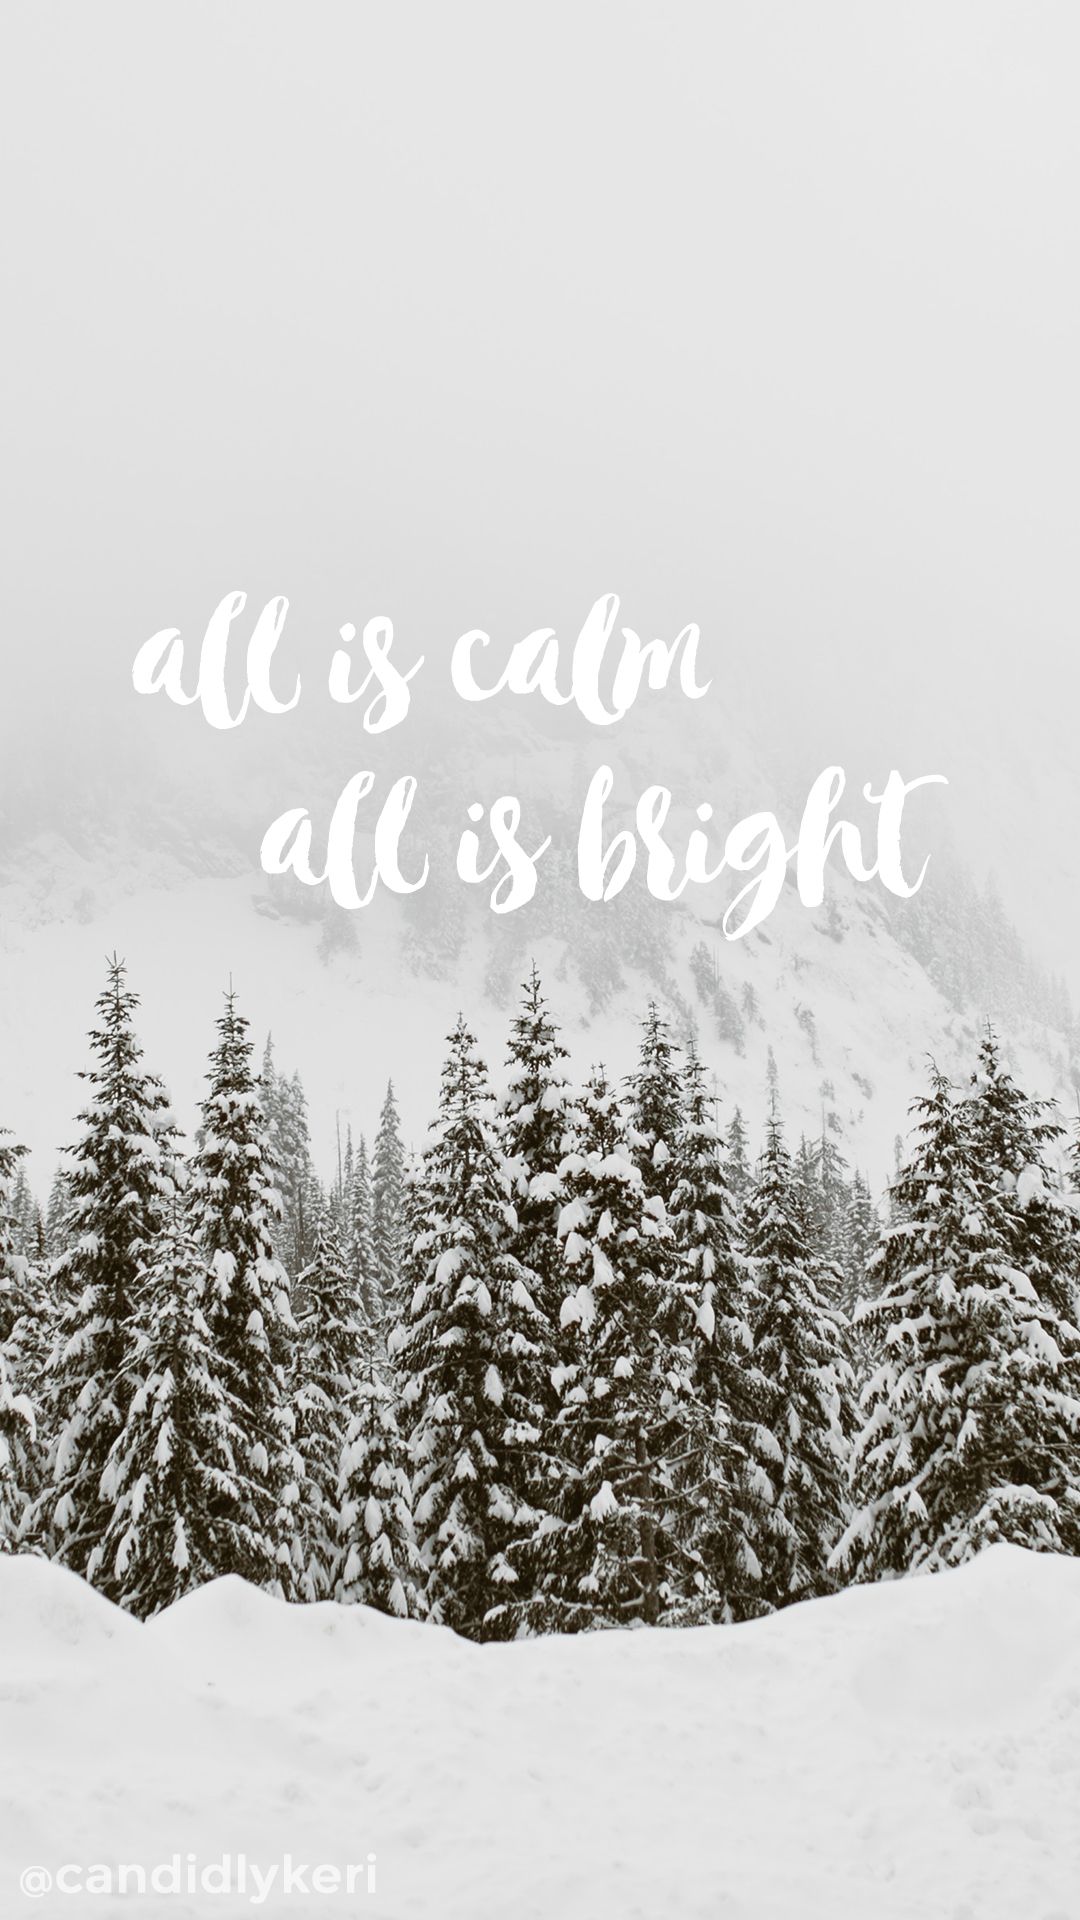 all is calm all is bright background wallpaper you can download